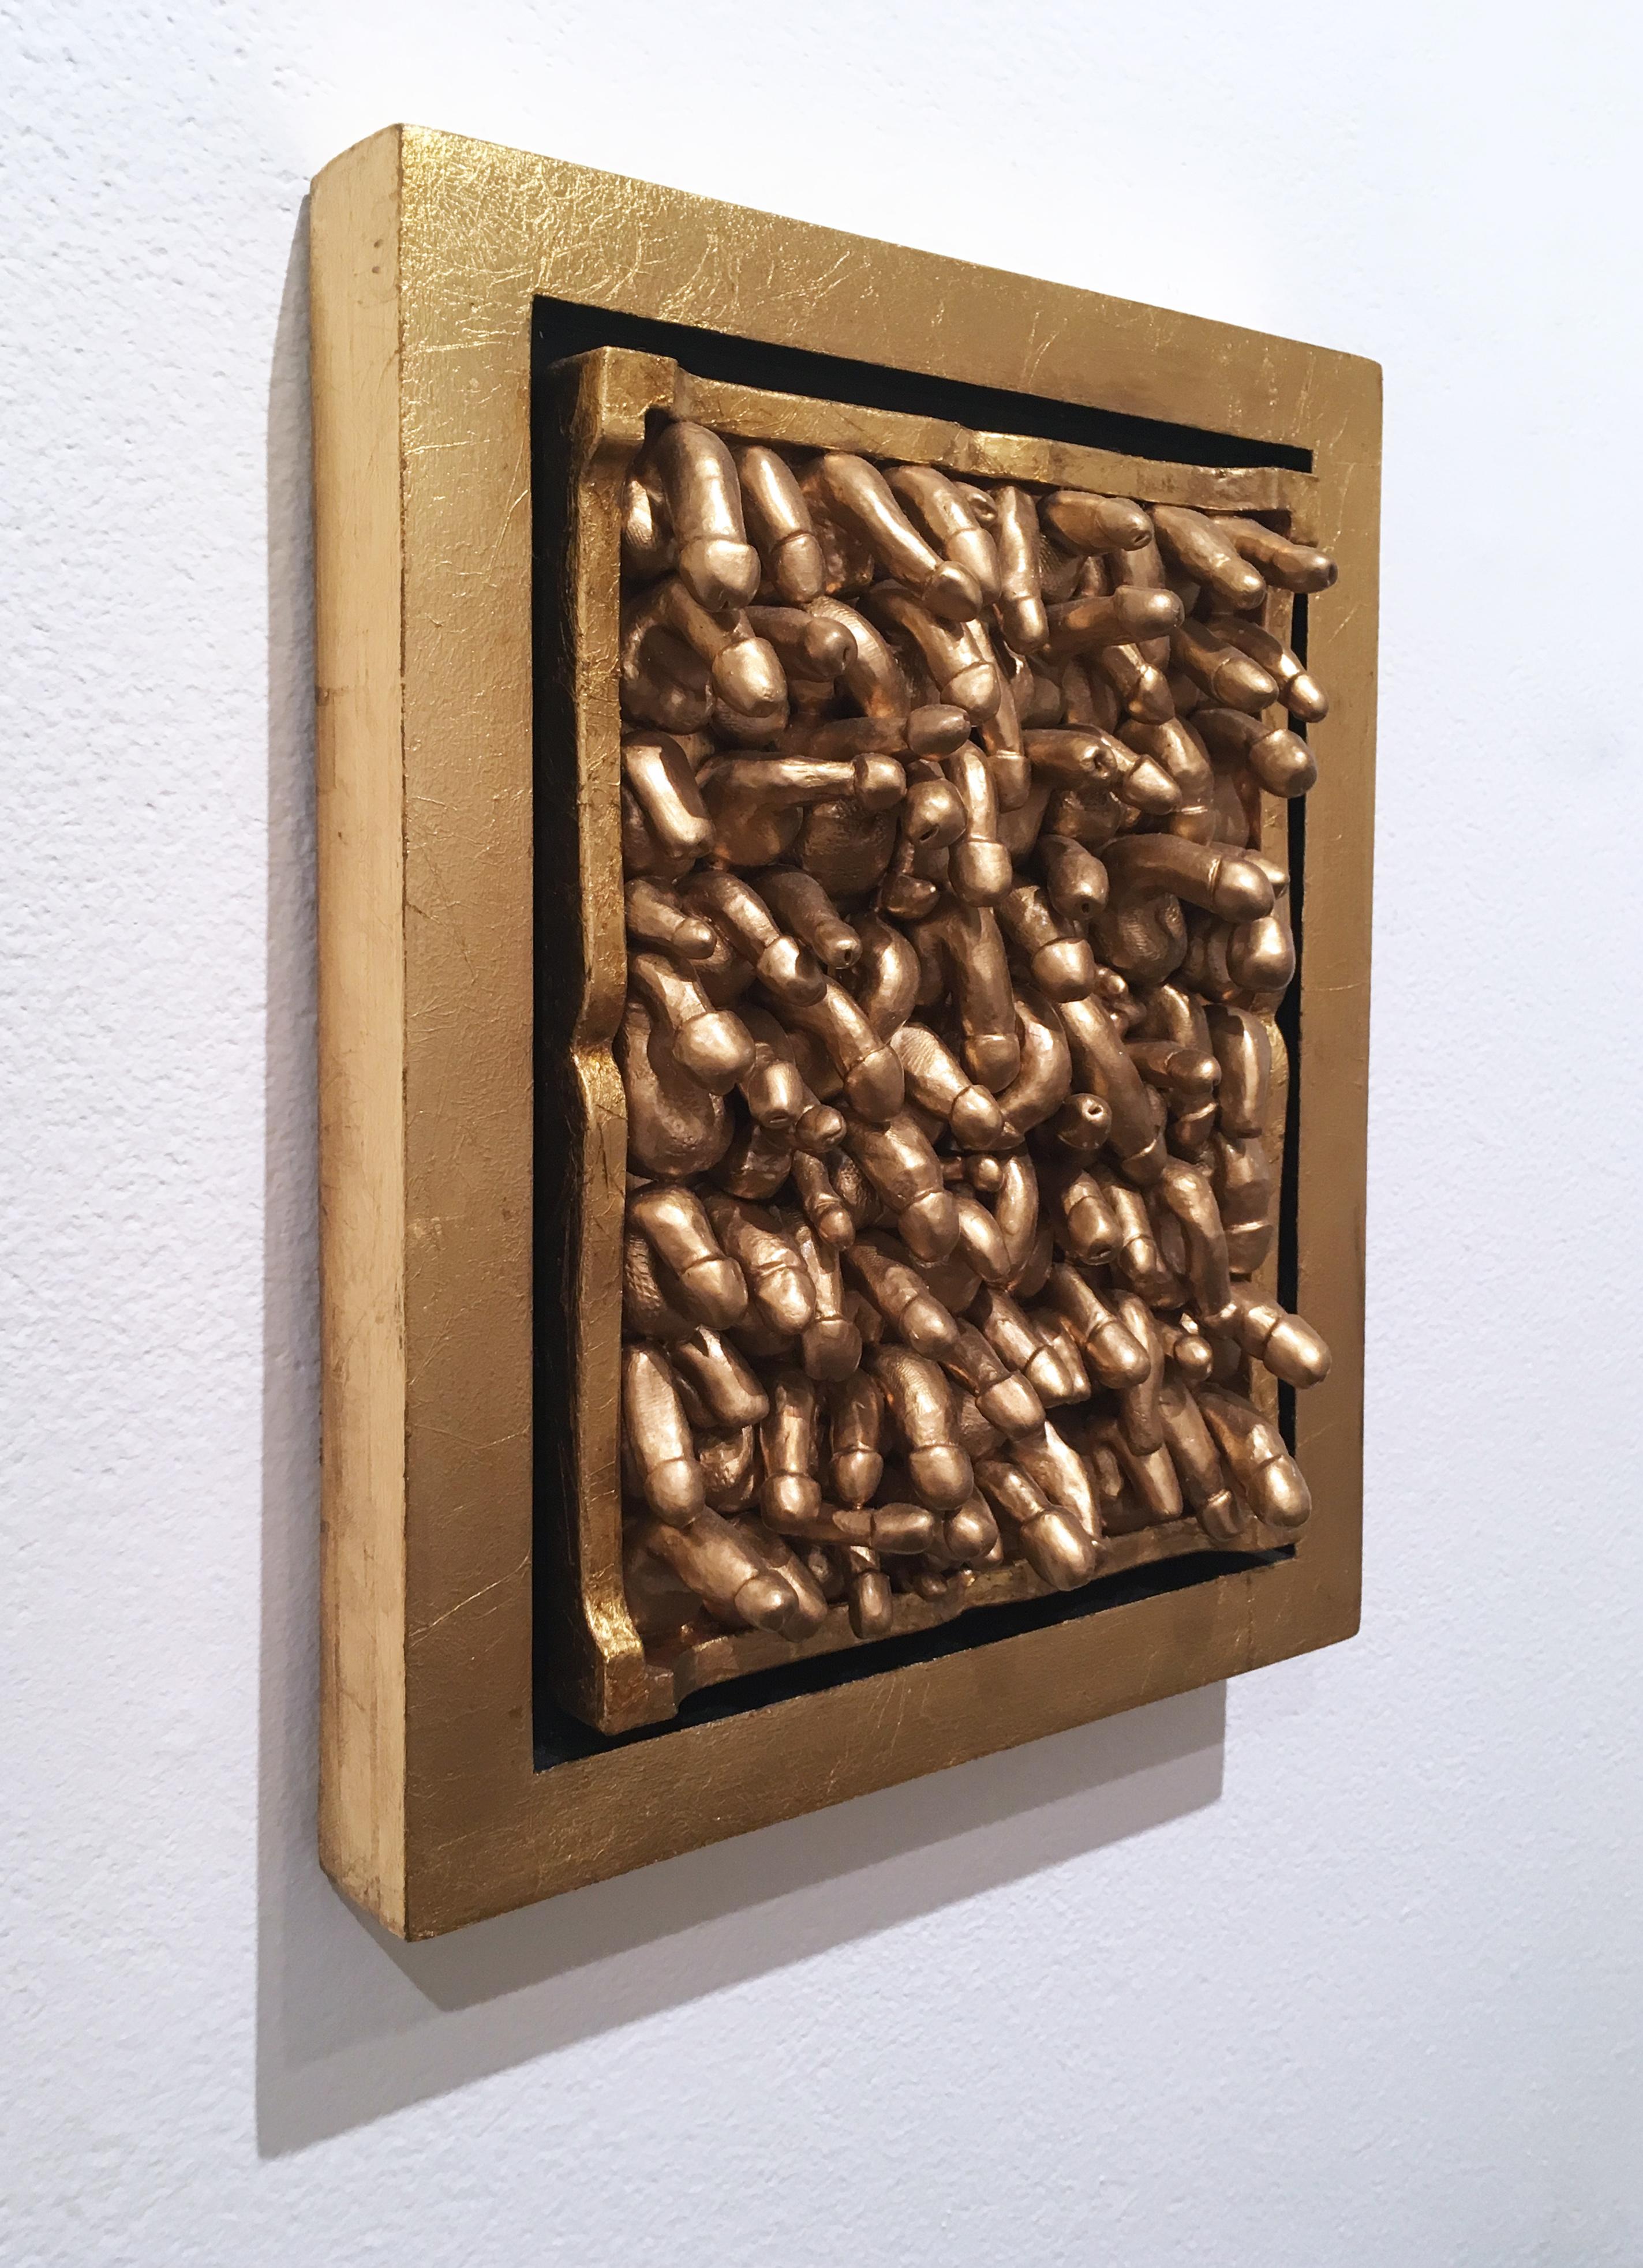 Clay, ceramic, gold leaf, found materials and enamel in gold leafed float frame
